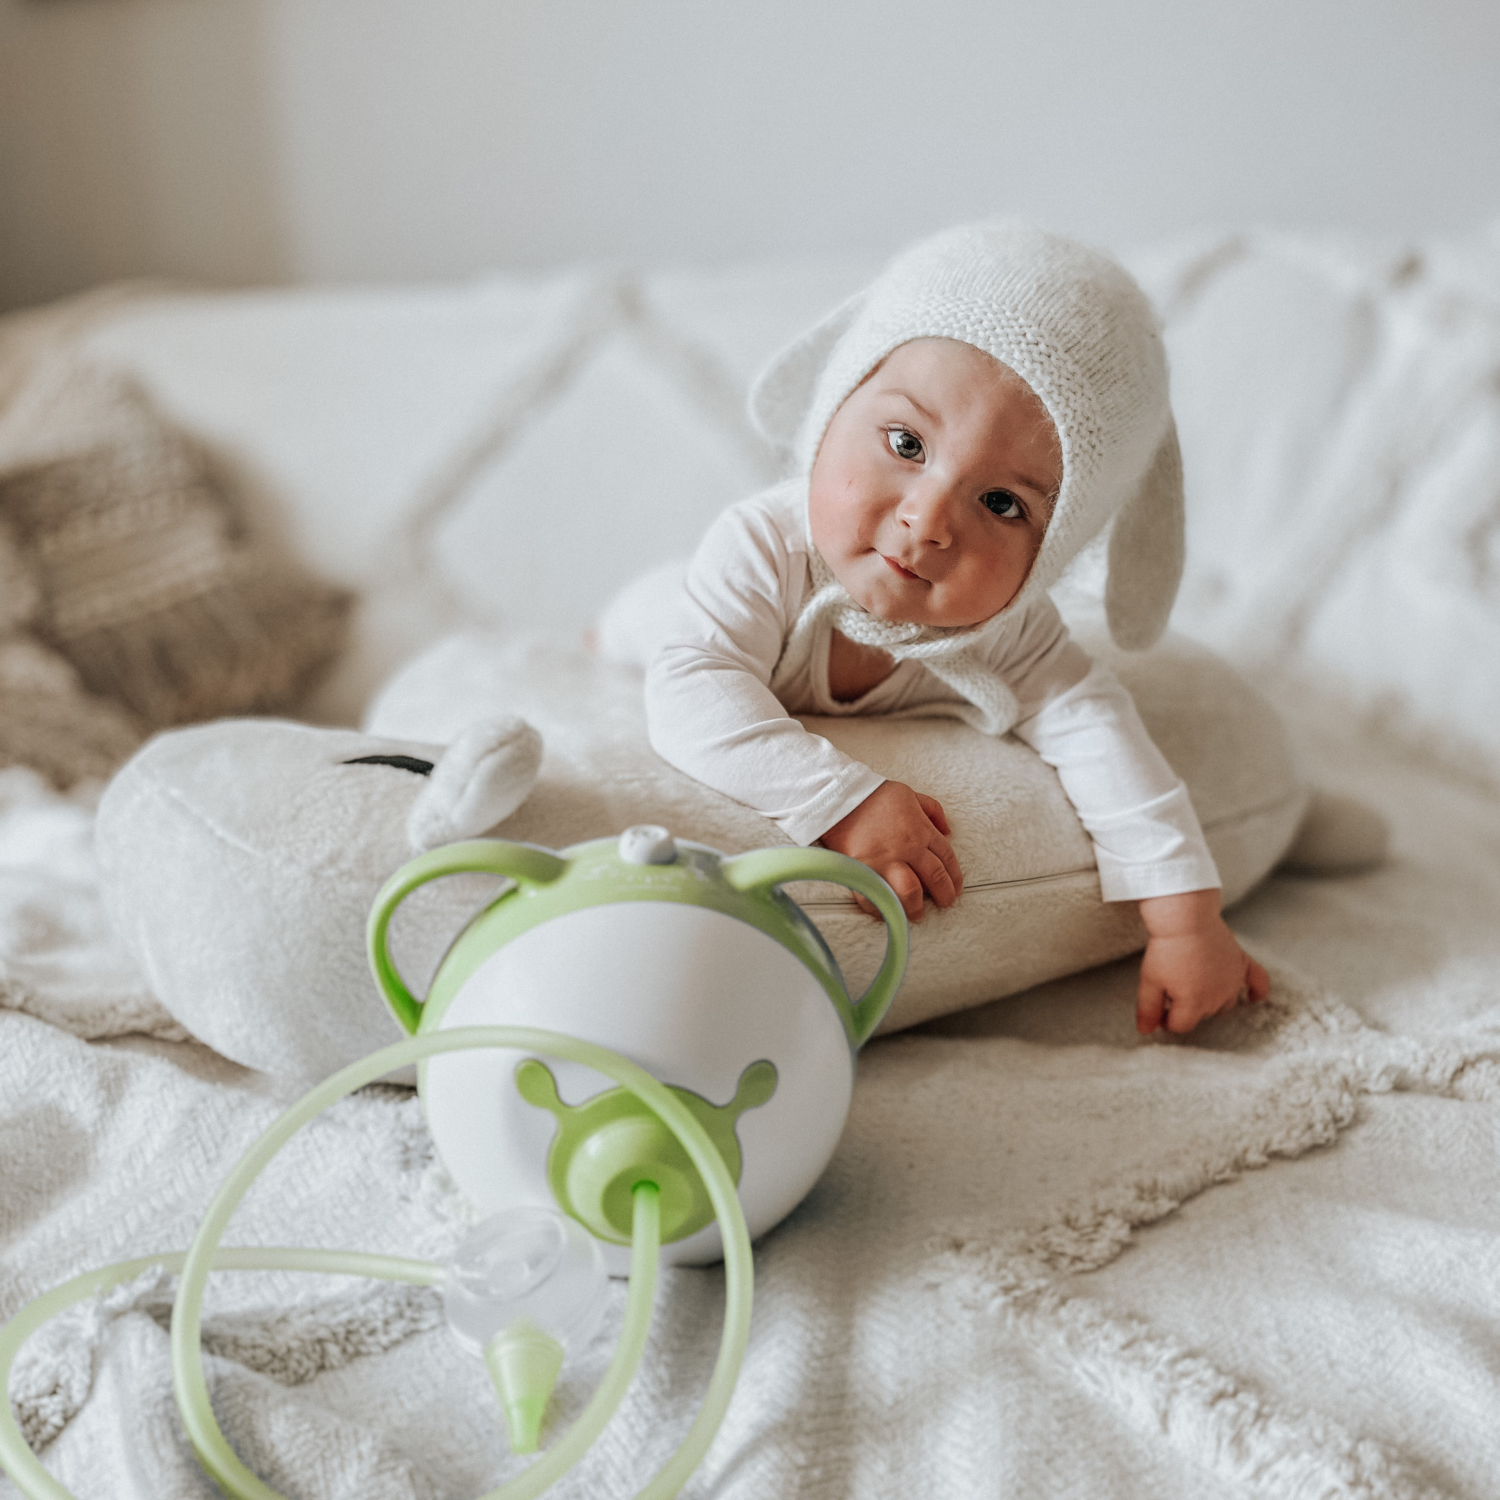 A baby in a cute beanie on a bed next to the Nosiboo Pro Electric Nasal Aspirator for cleaning little noses.